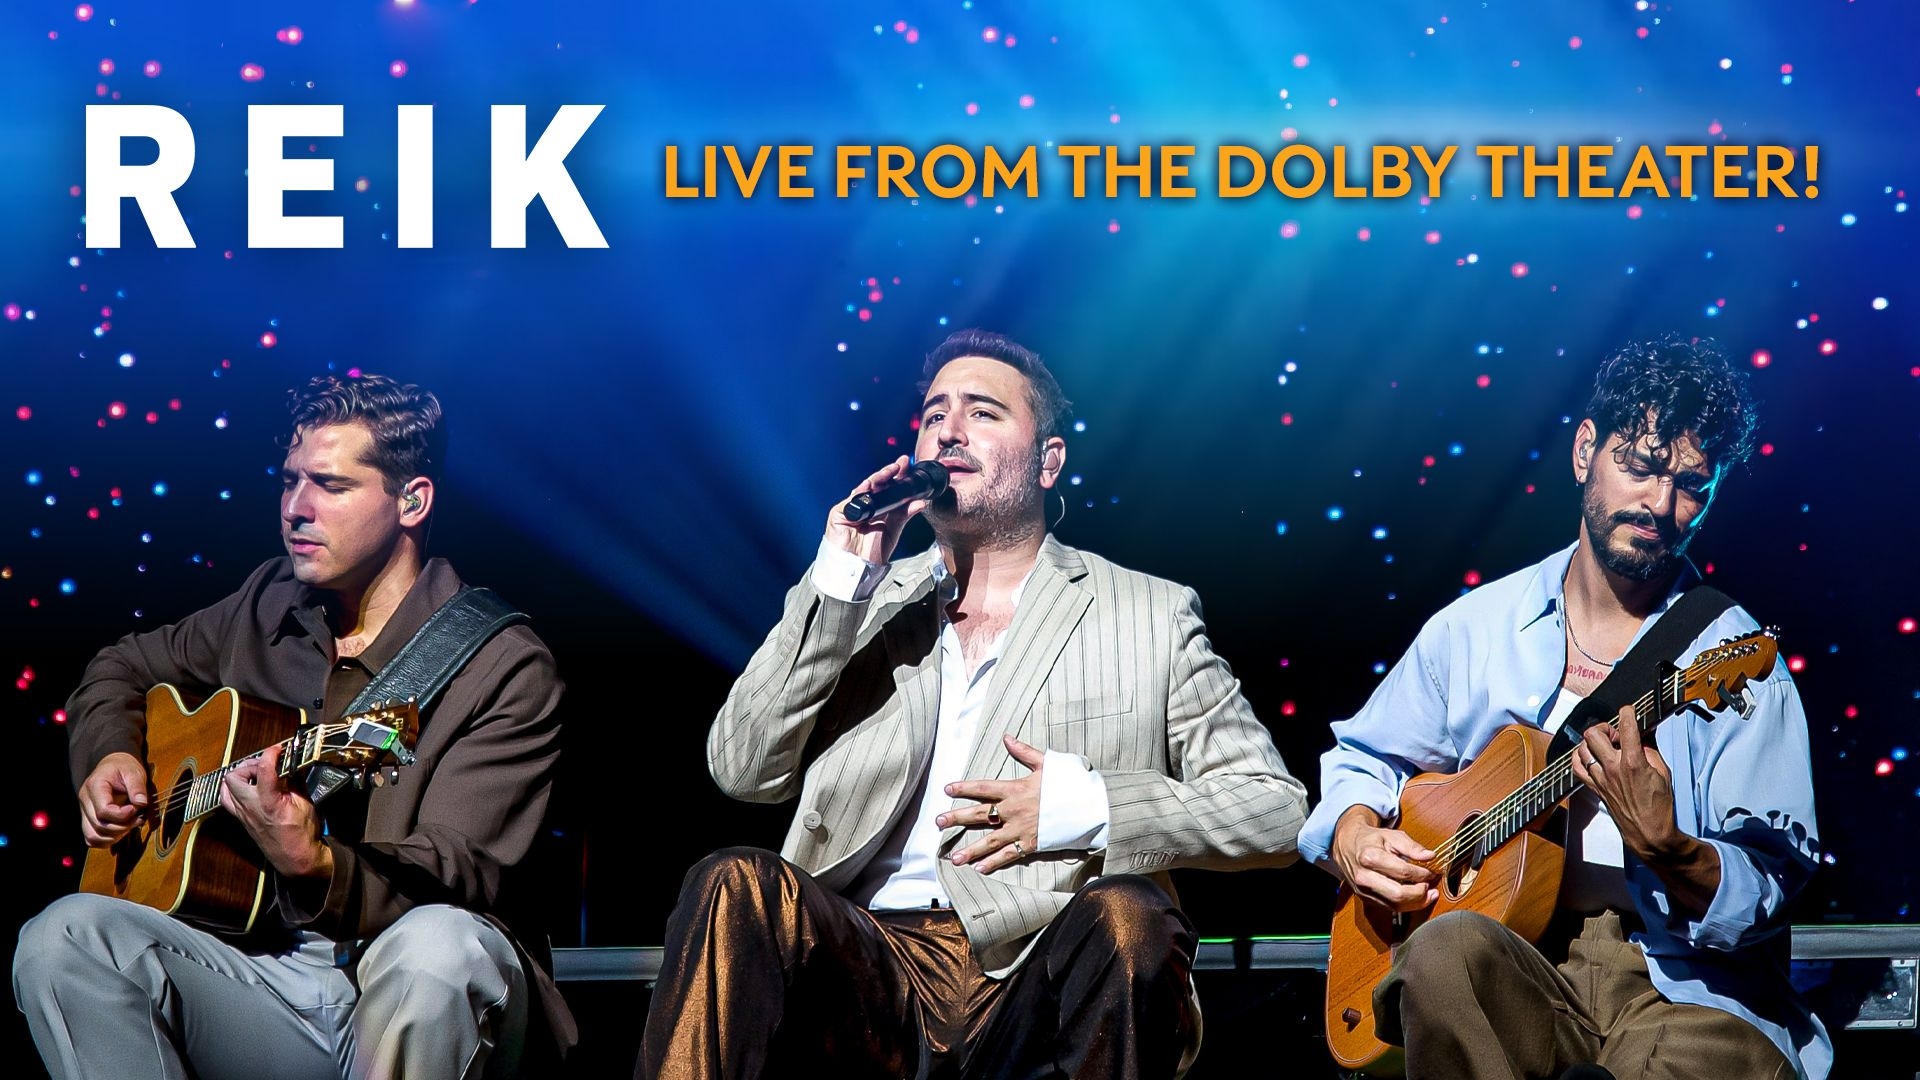 Reik live in concert from the Dolby Theater, on demand exclusively with Spectrum TV.